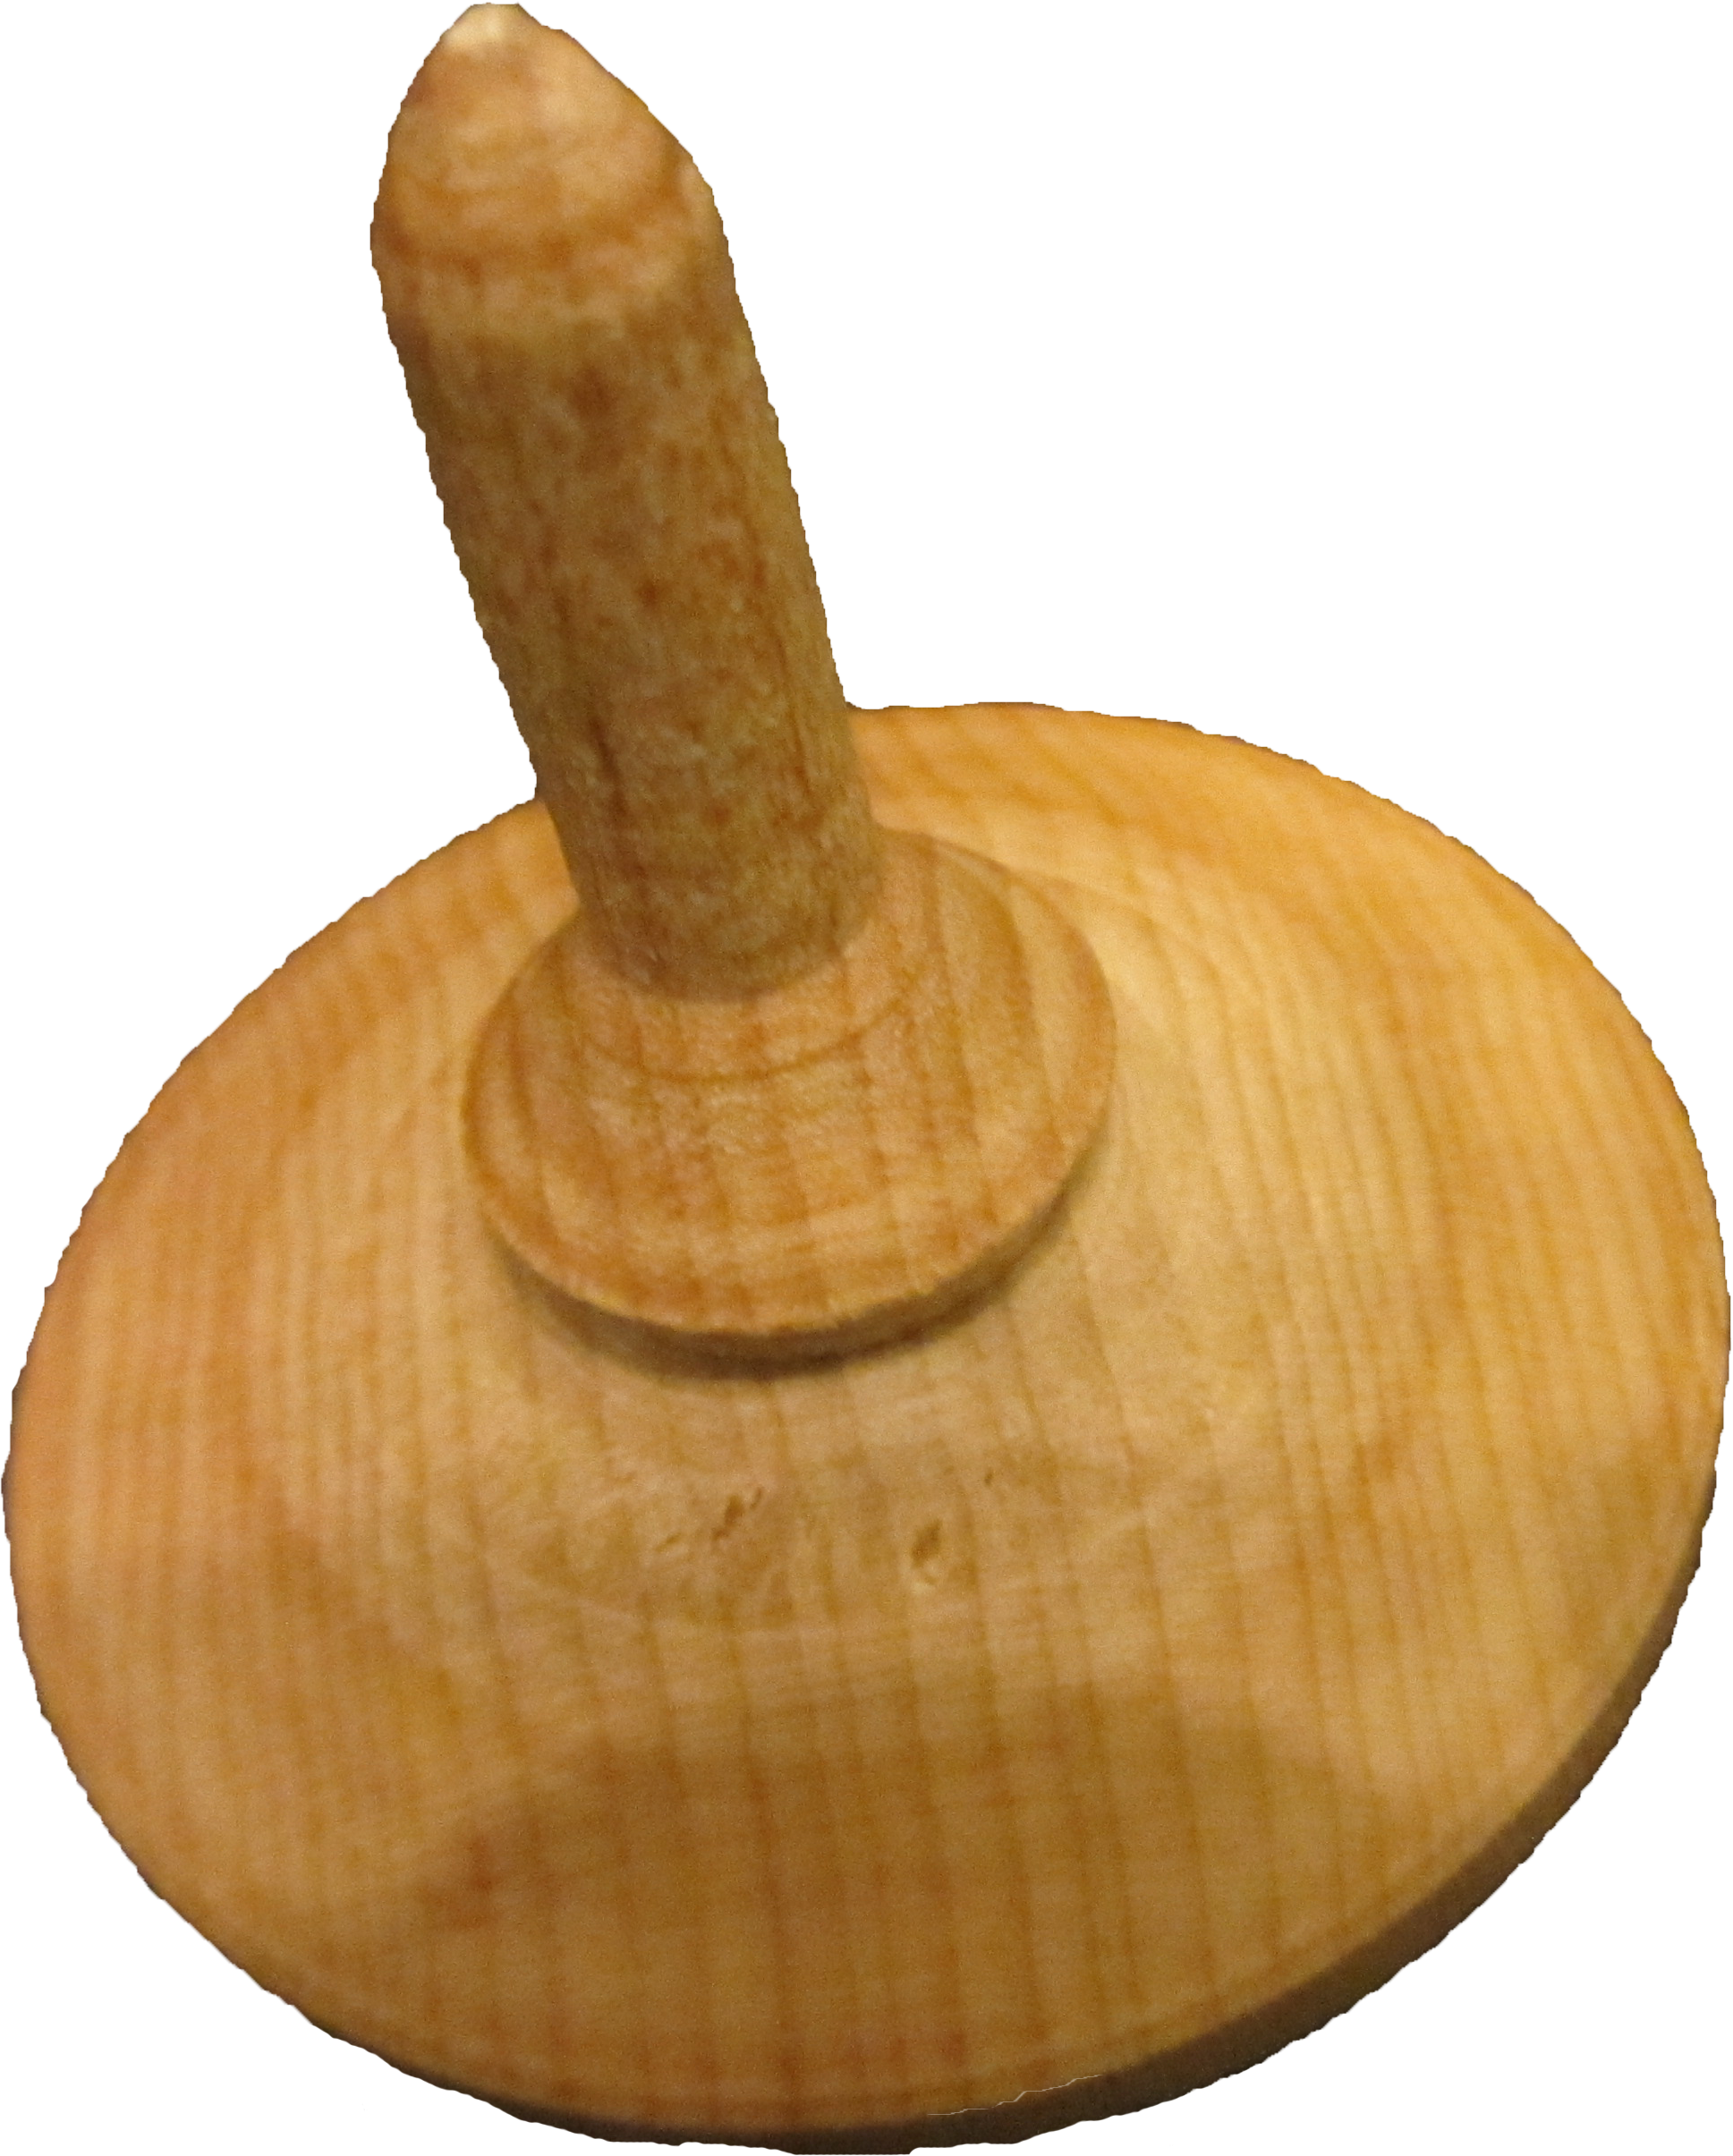 woodturning spinning tops